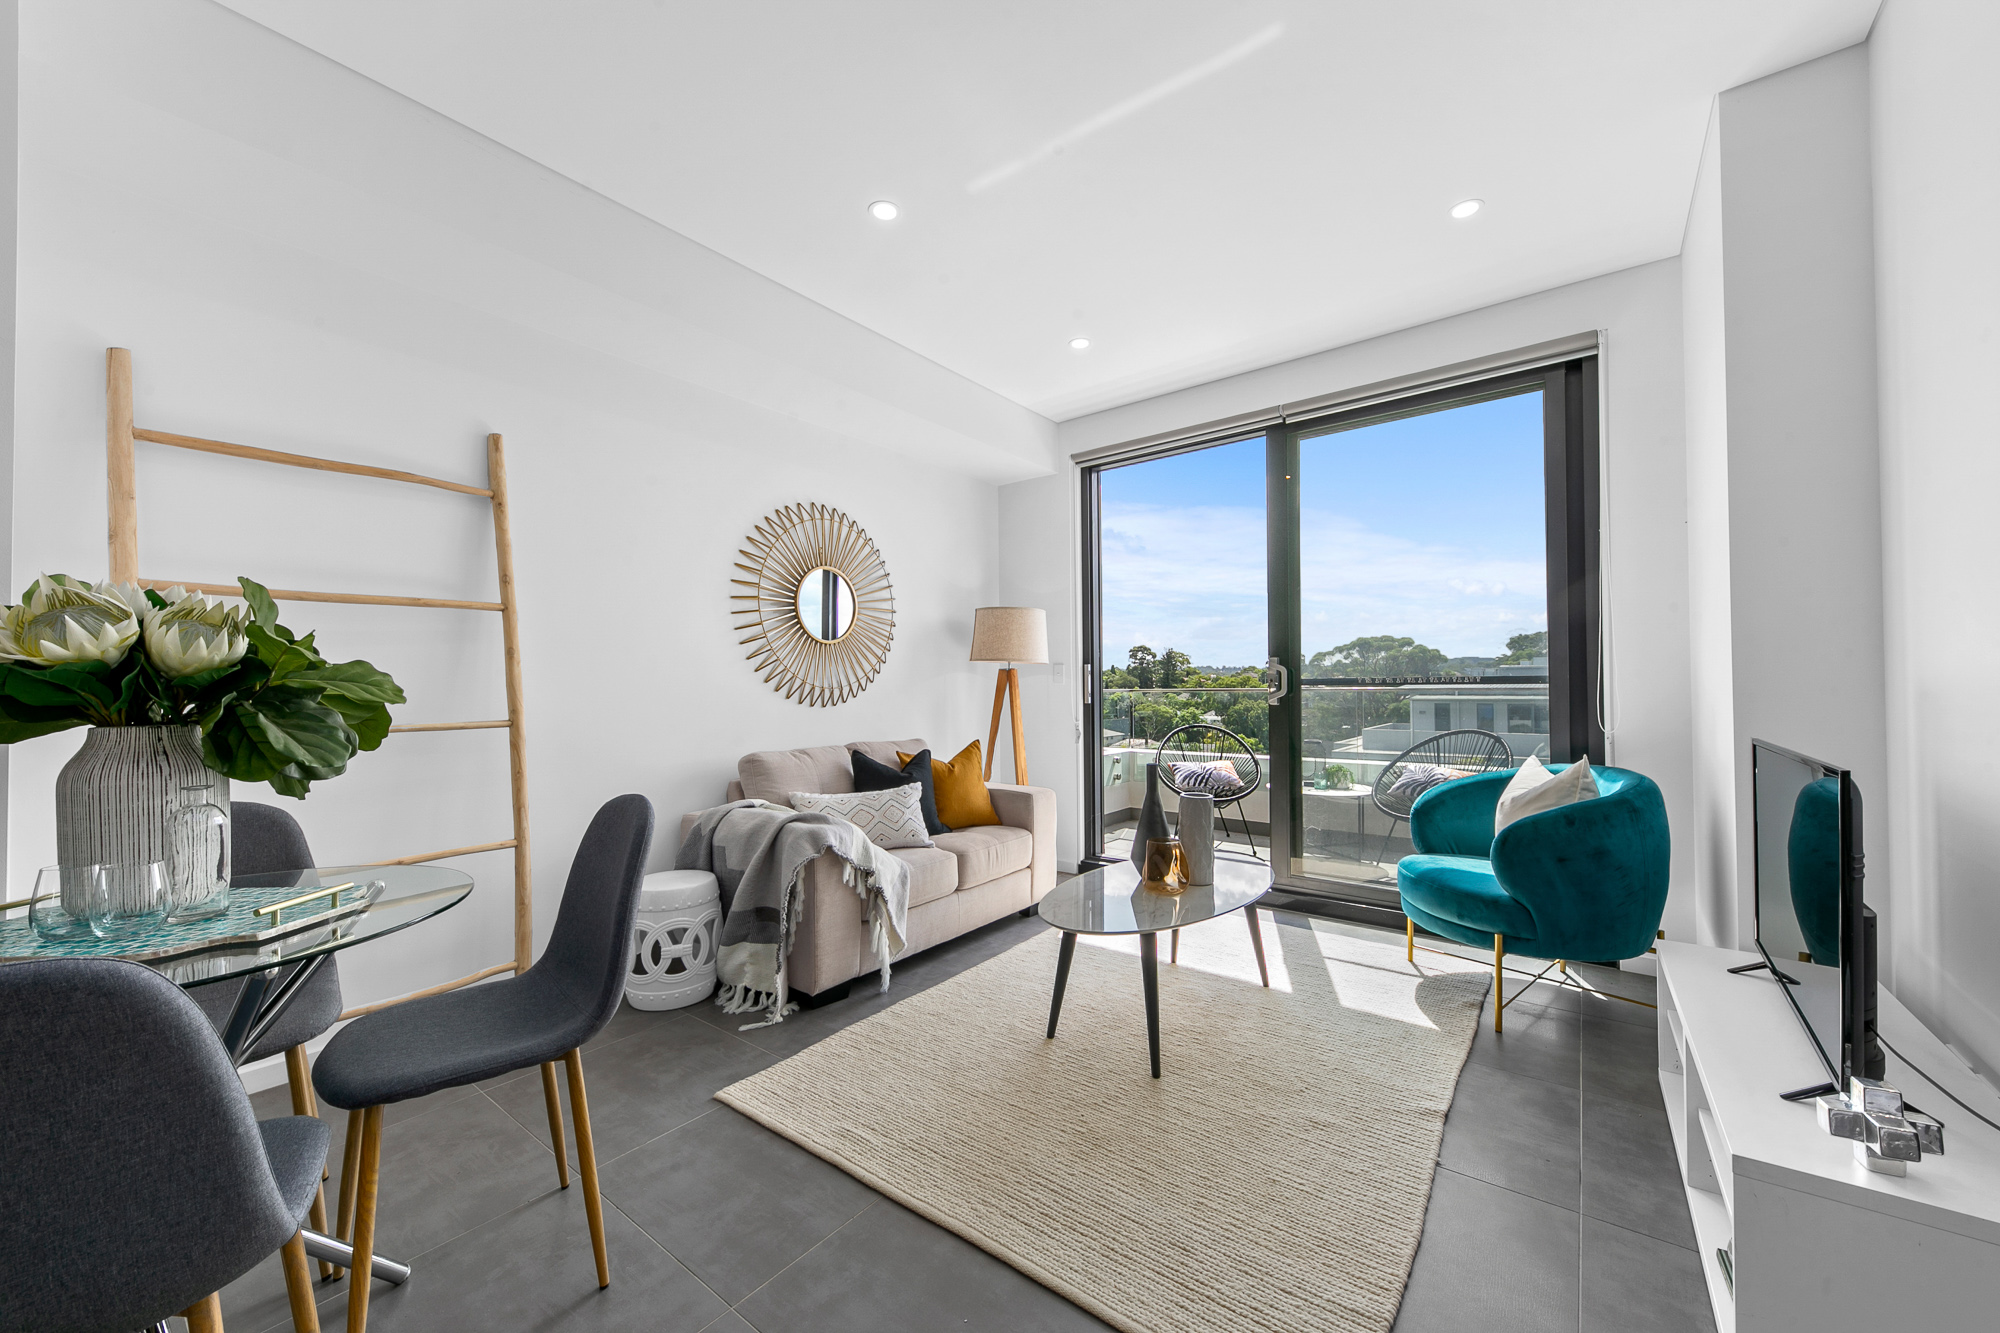 1 Bedrooms, Apartment, For Sale, Cliff Road , 1 Bathrooms, Listing ID 1521, Sydney, Epping, Australia, 2121,